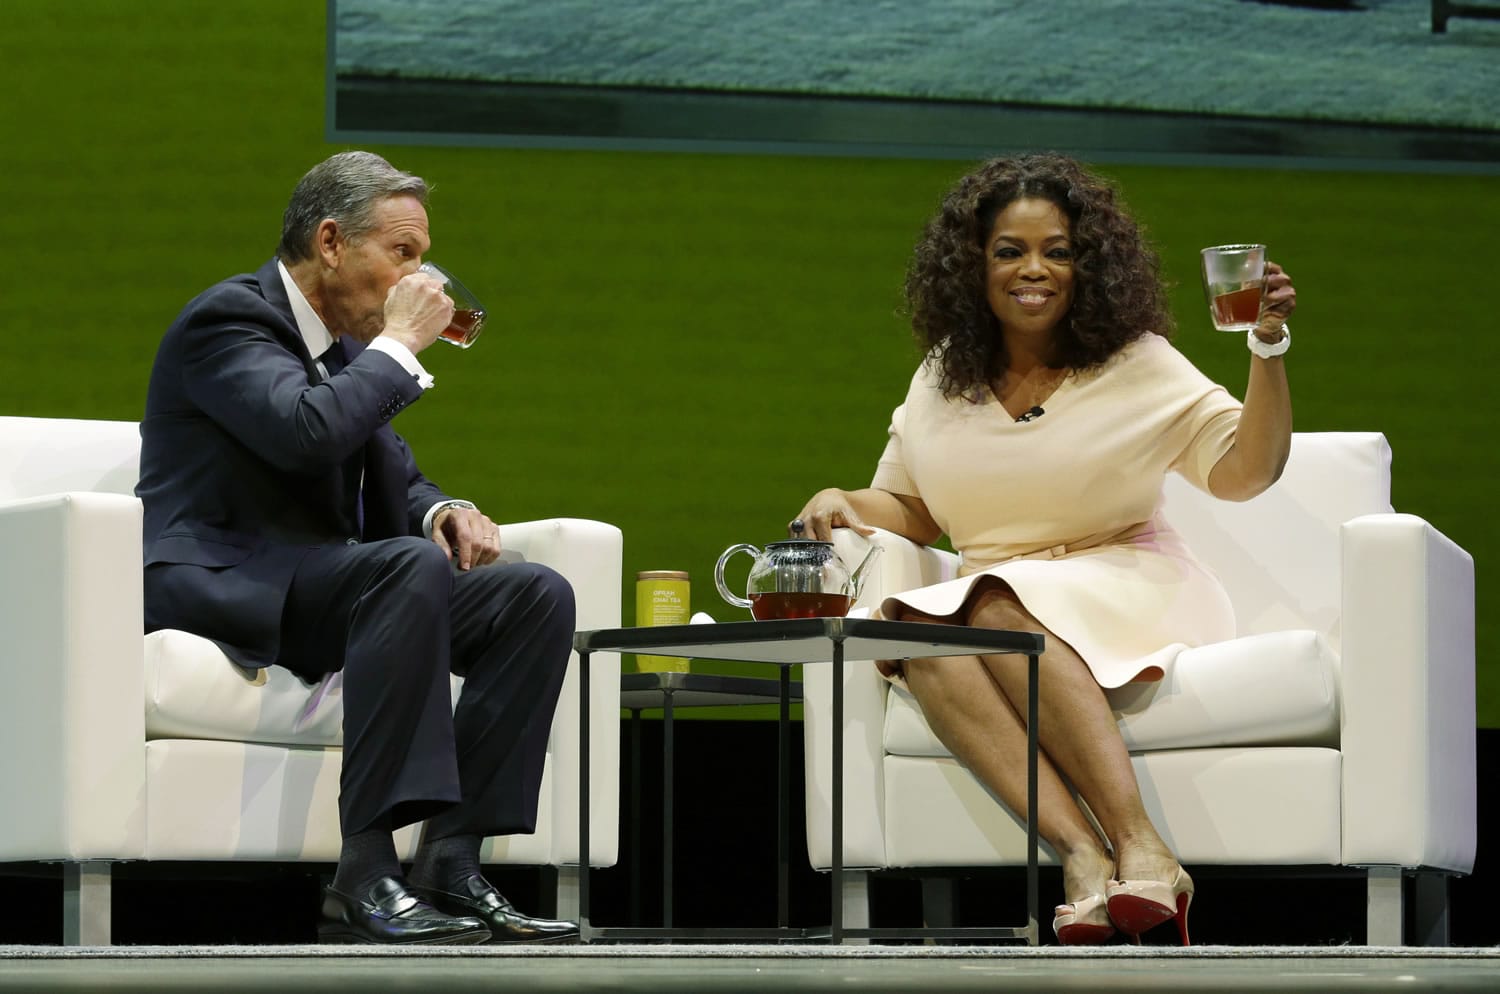 Howard Schultz, left, chairman and CEO of Starbucks Coffee Company, drinks tea with Oprah Winfrey on  Wednesday at Starbucks' annual shareholders meeting in Seattle.